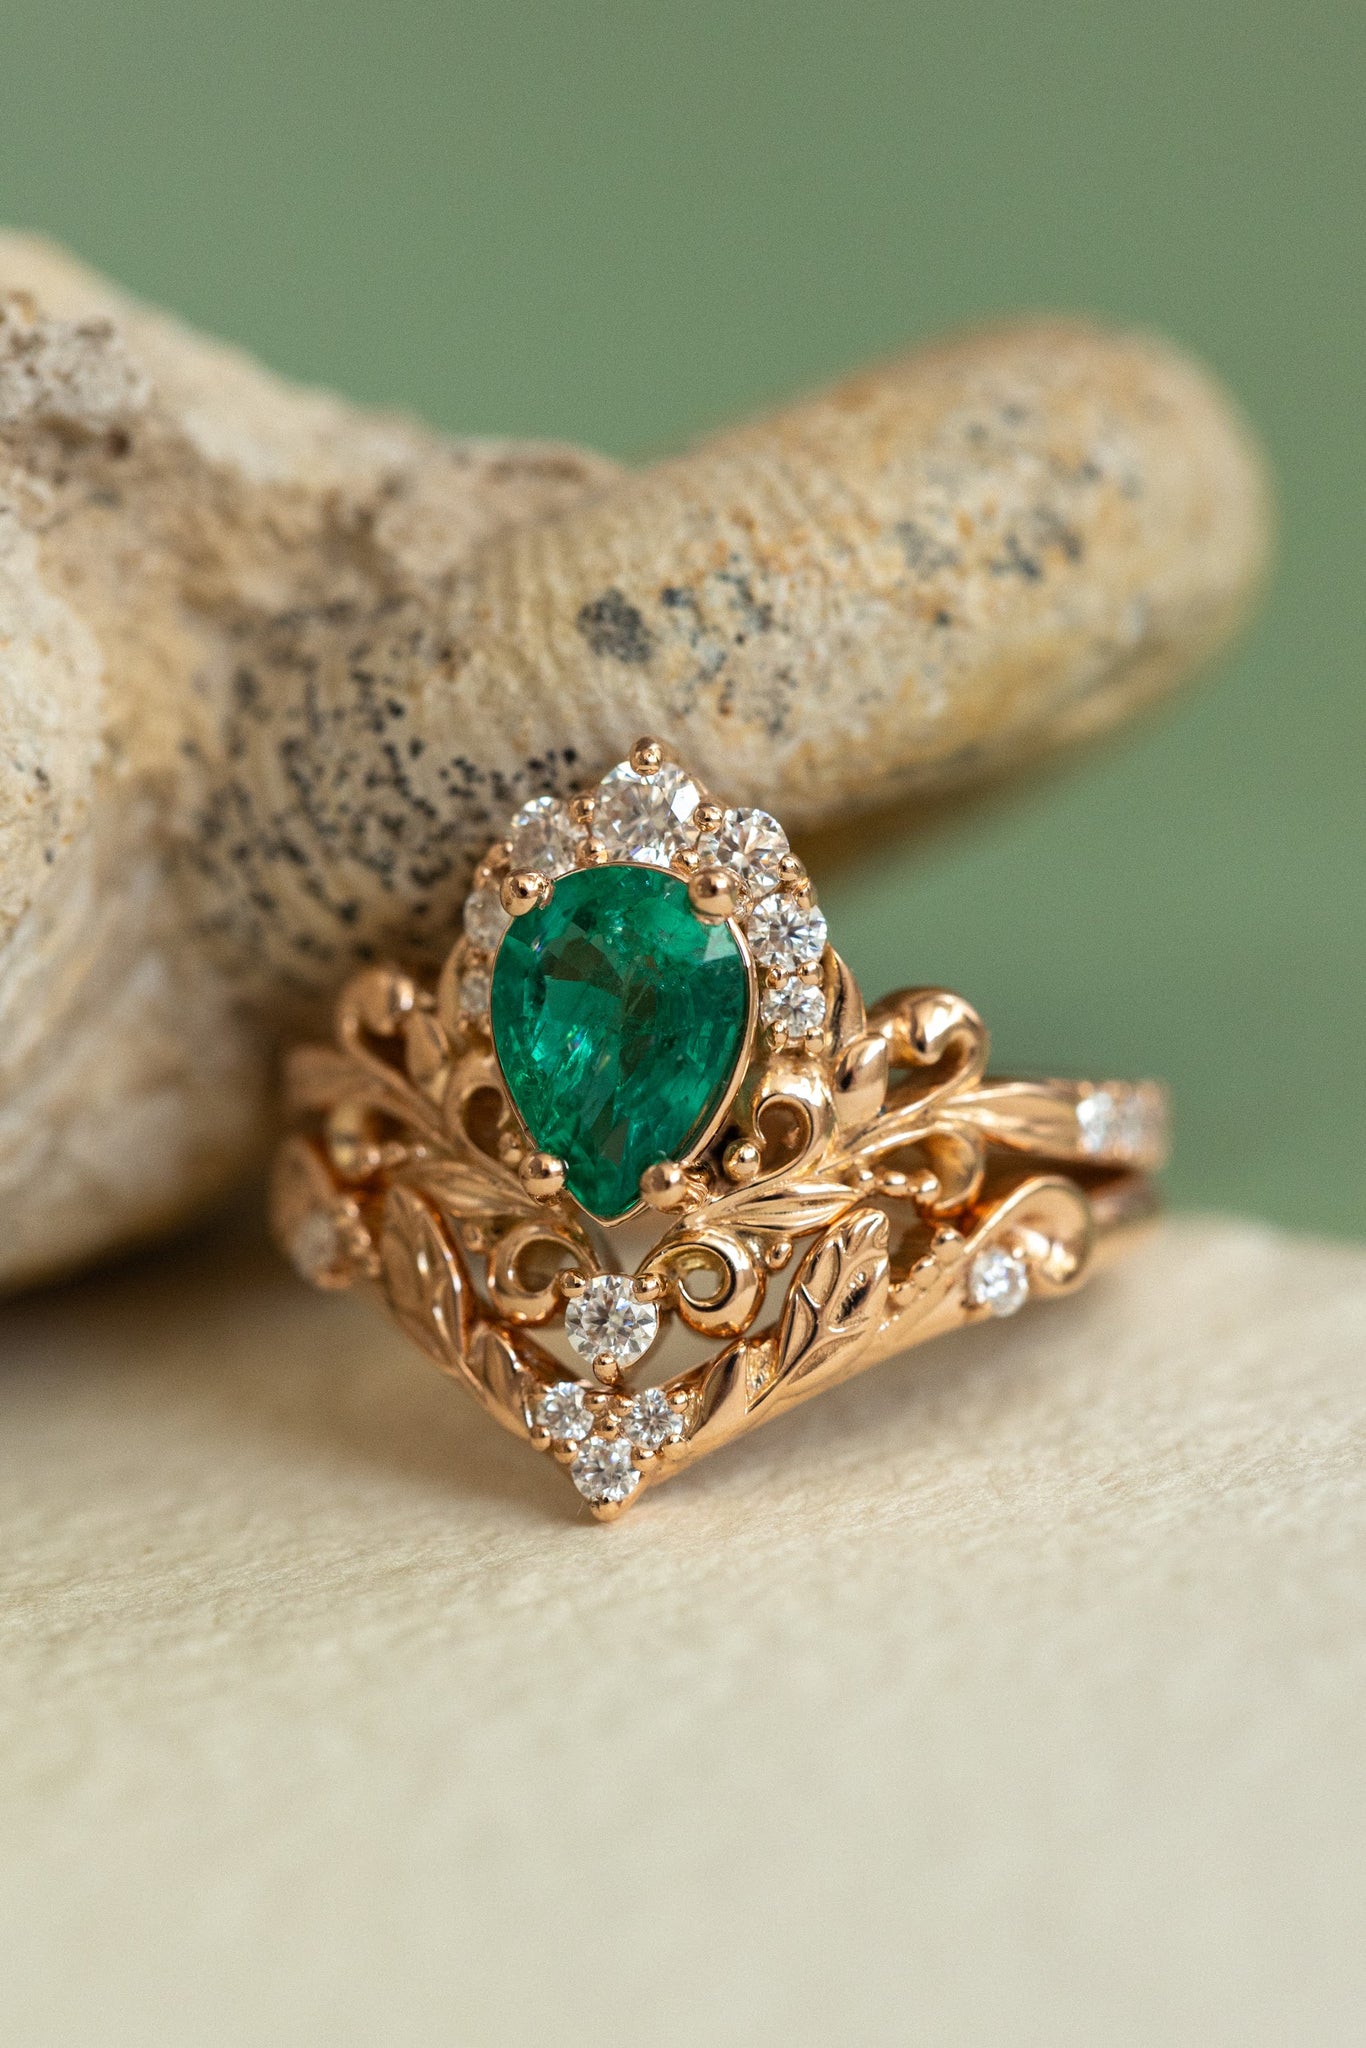 Emerald and diamonds bridal ring set, baroque inspired gold engagement ring set / Sophie - Eden Garden Jewelry™